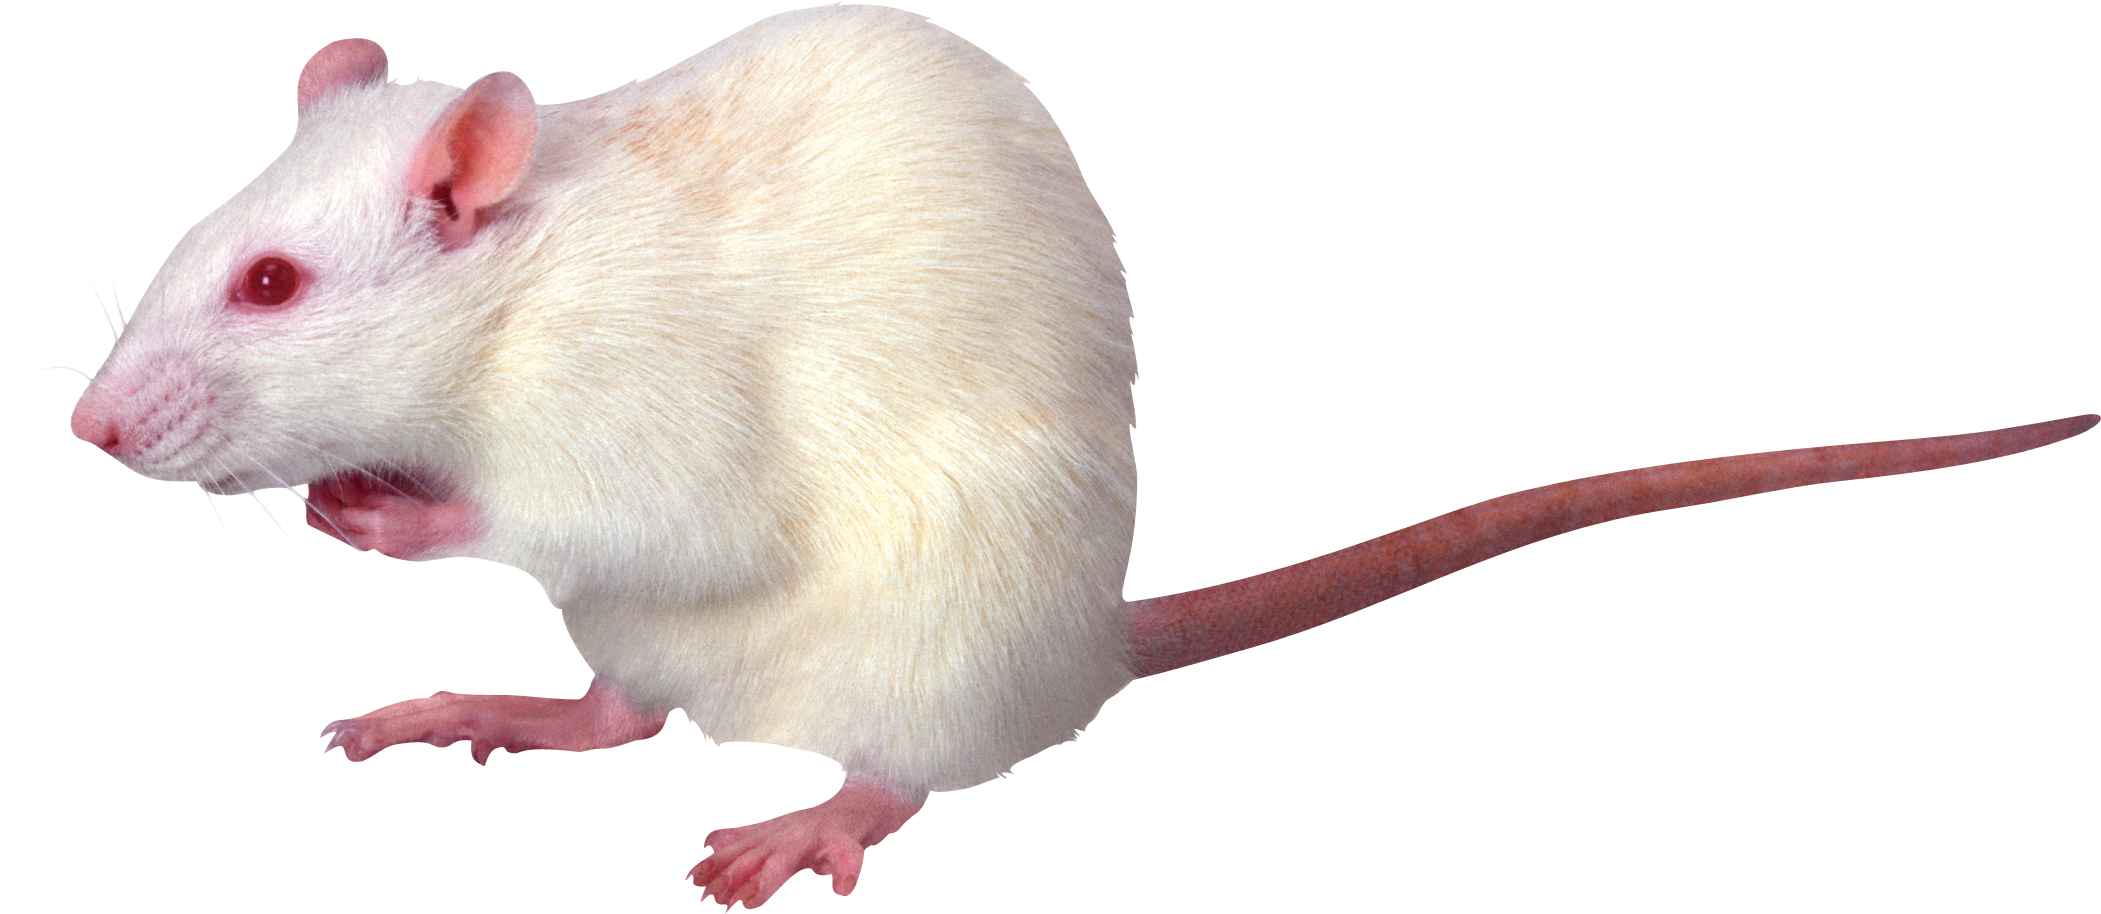 Rat, mouse, mice PNG free images, pictures.